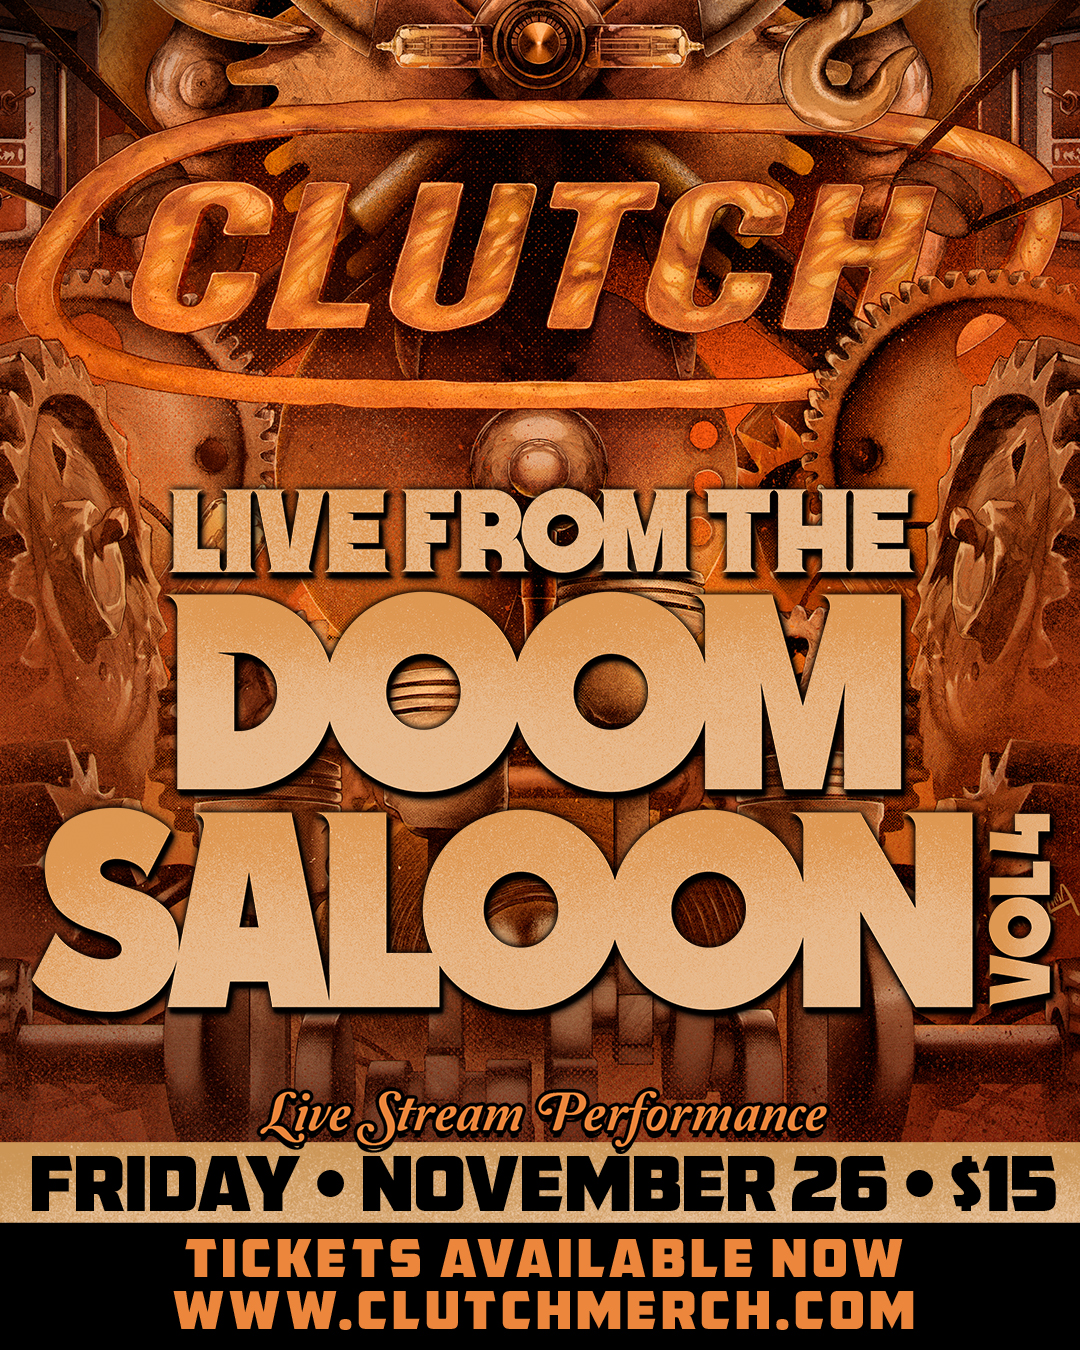 Clutch live from the doom saloon vol 4